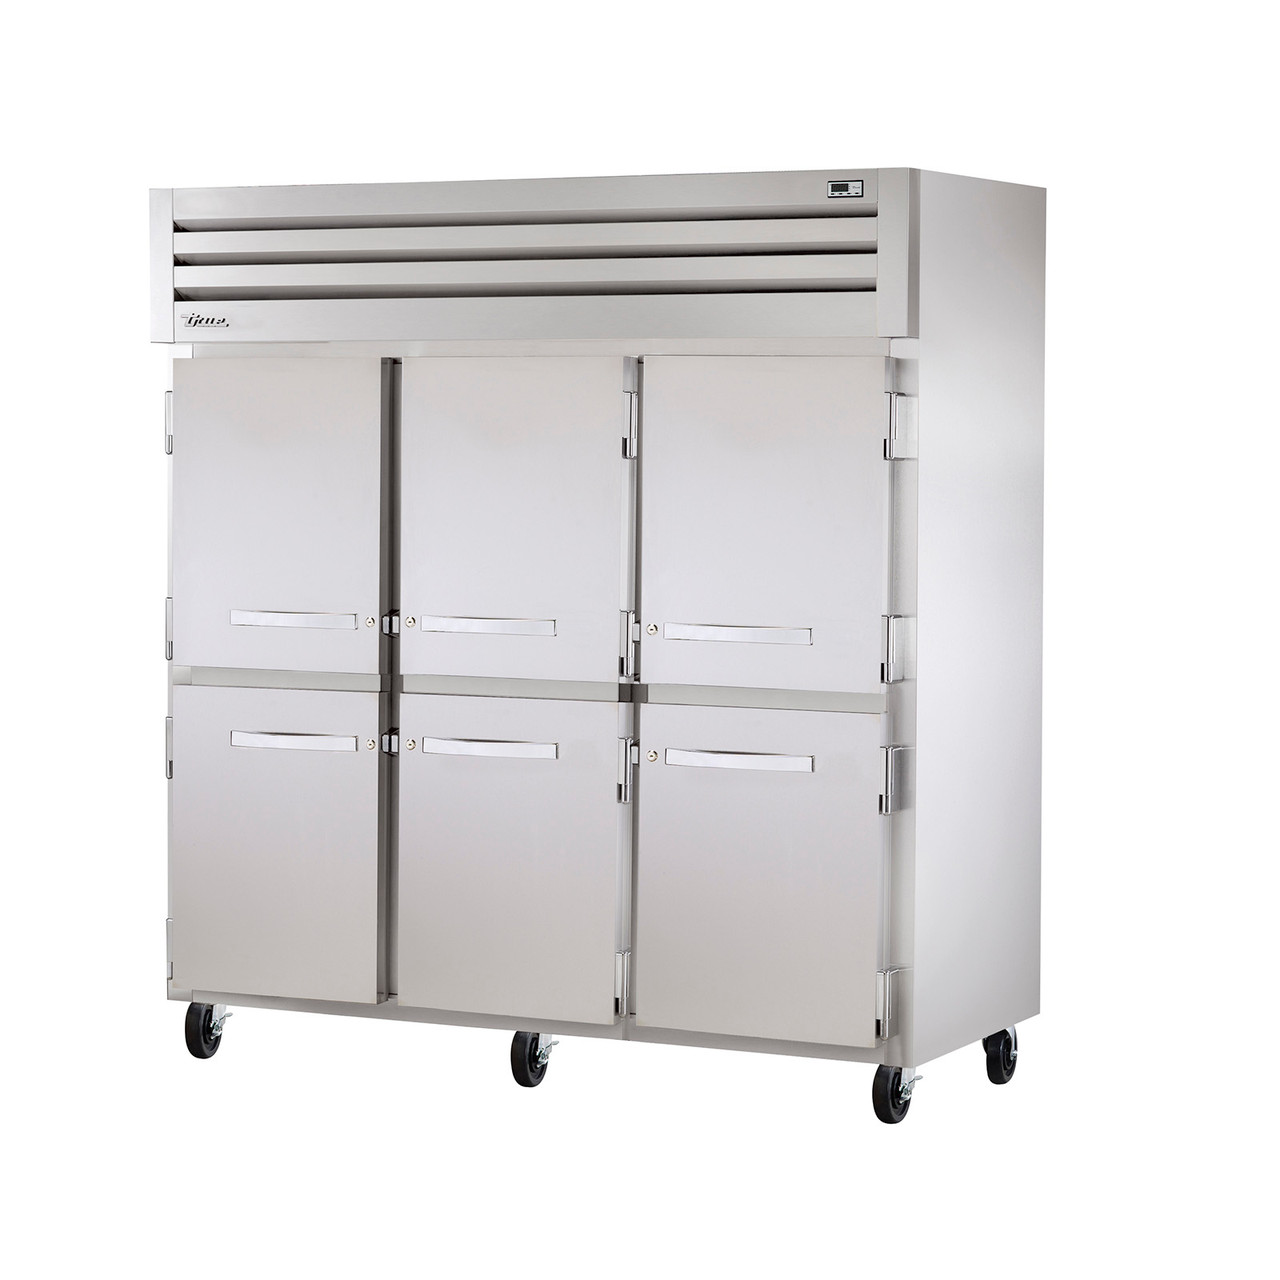 True Manufacturing STA3R-6HS Spec Series 3 Section Refrigerator with Half Height Solid Doors - Aluminum Interior